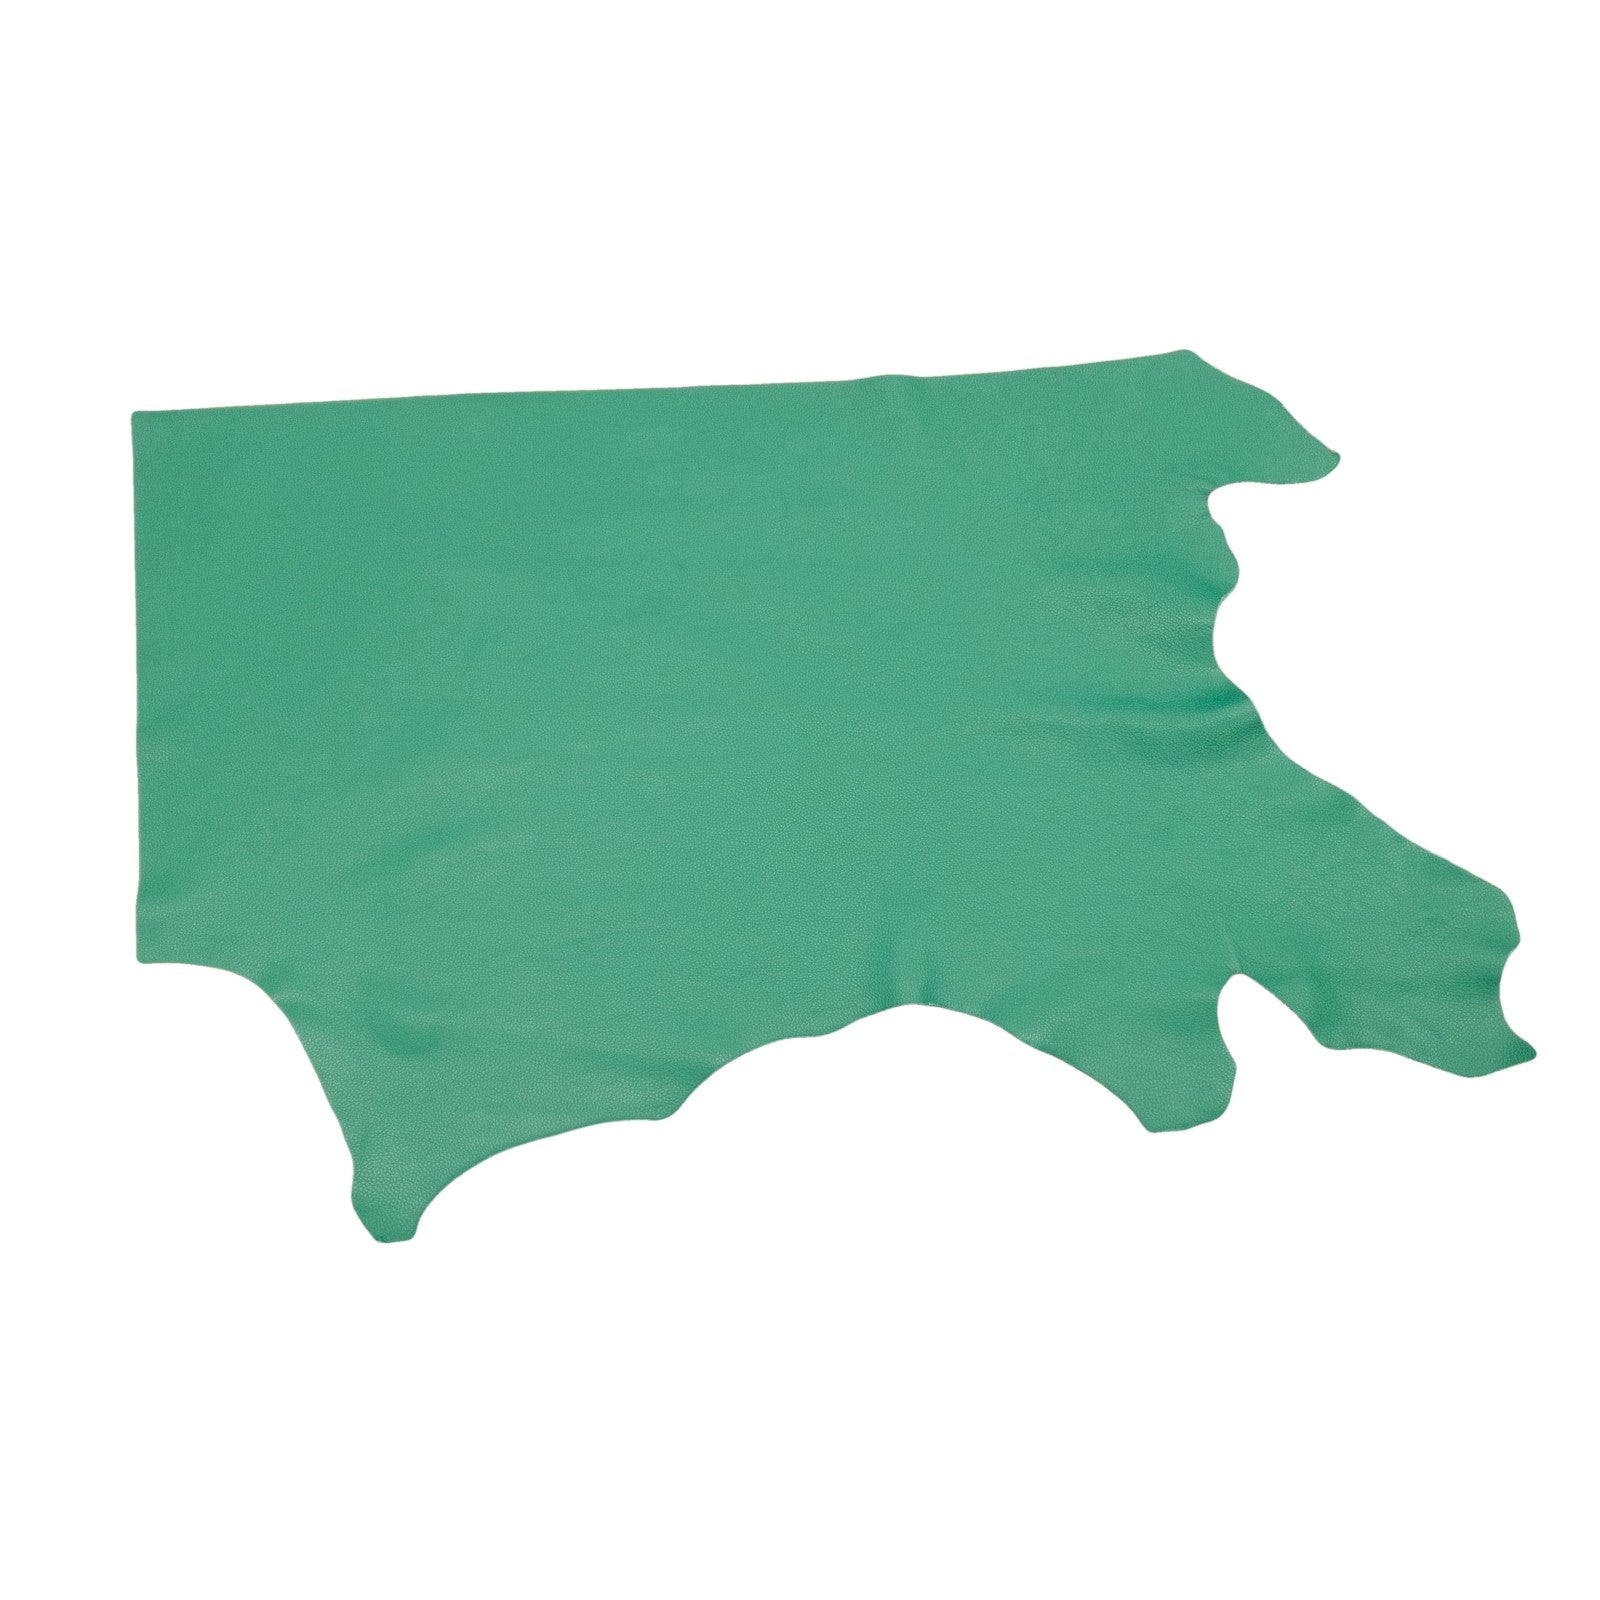 Wisconsin Bay Green, Tried n True, 3-4 oz Leather Cow Hides, 6.5-7.5 Square Foot / Project Piece (Bottom) | The Leather Guy